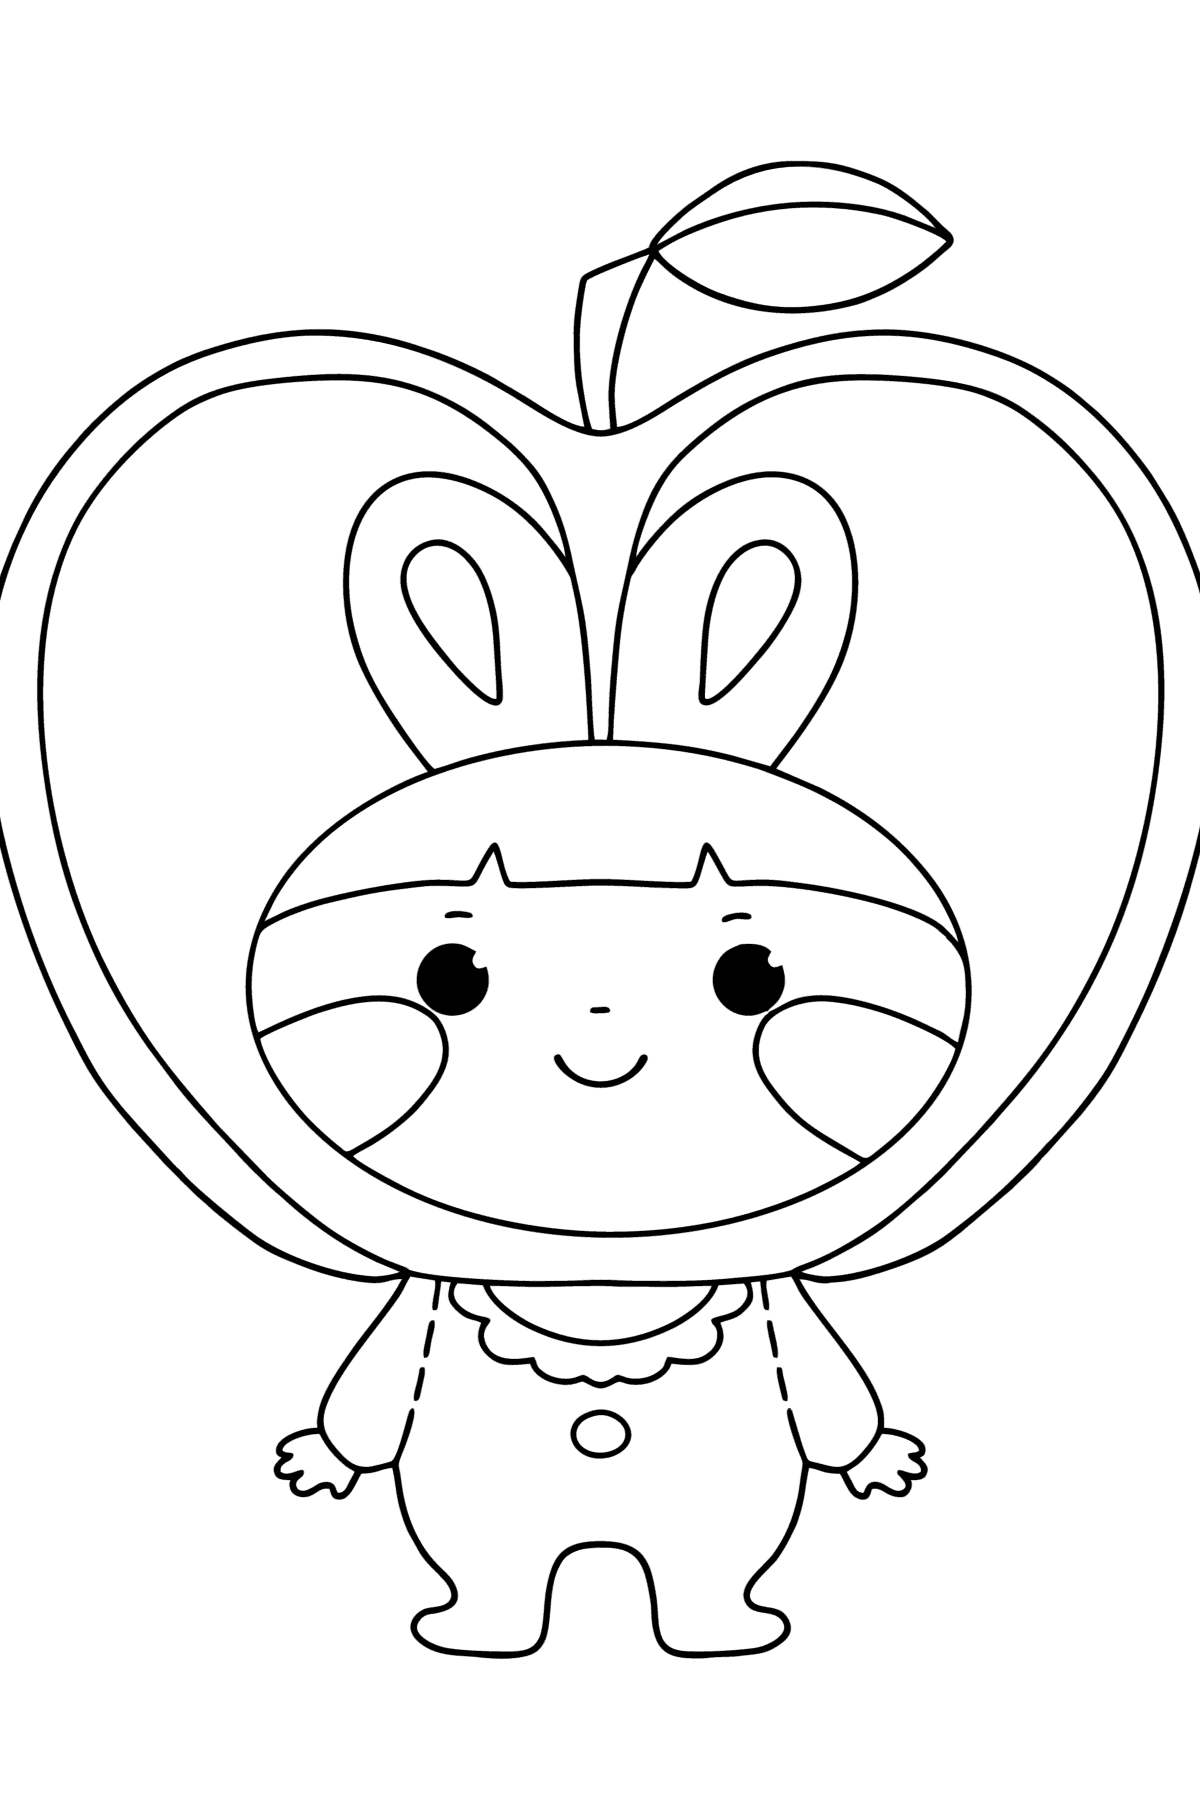 Suit apple сoloring page - Coloring Pages for Kids